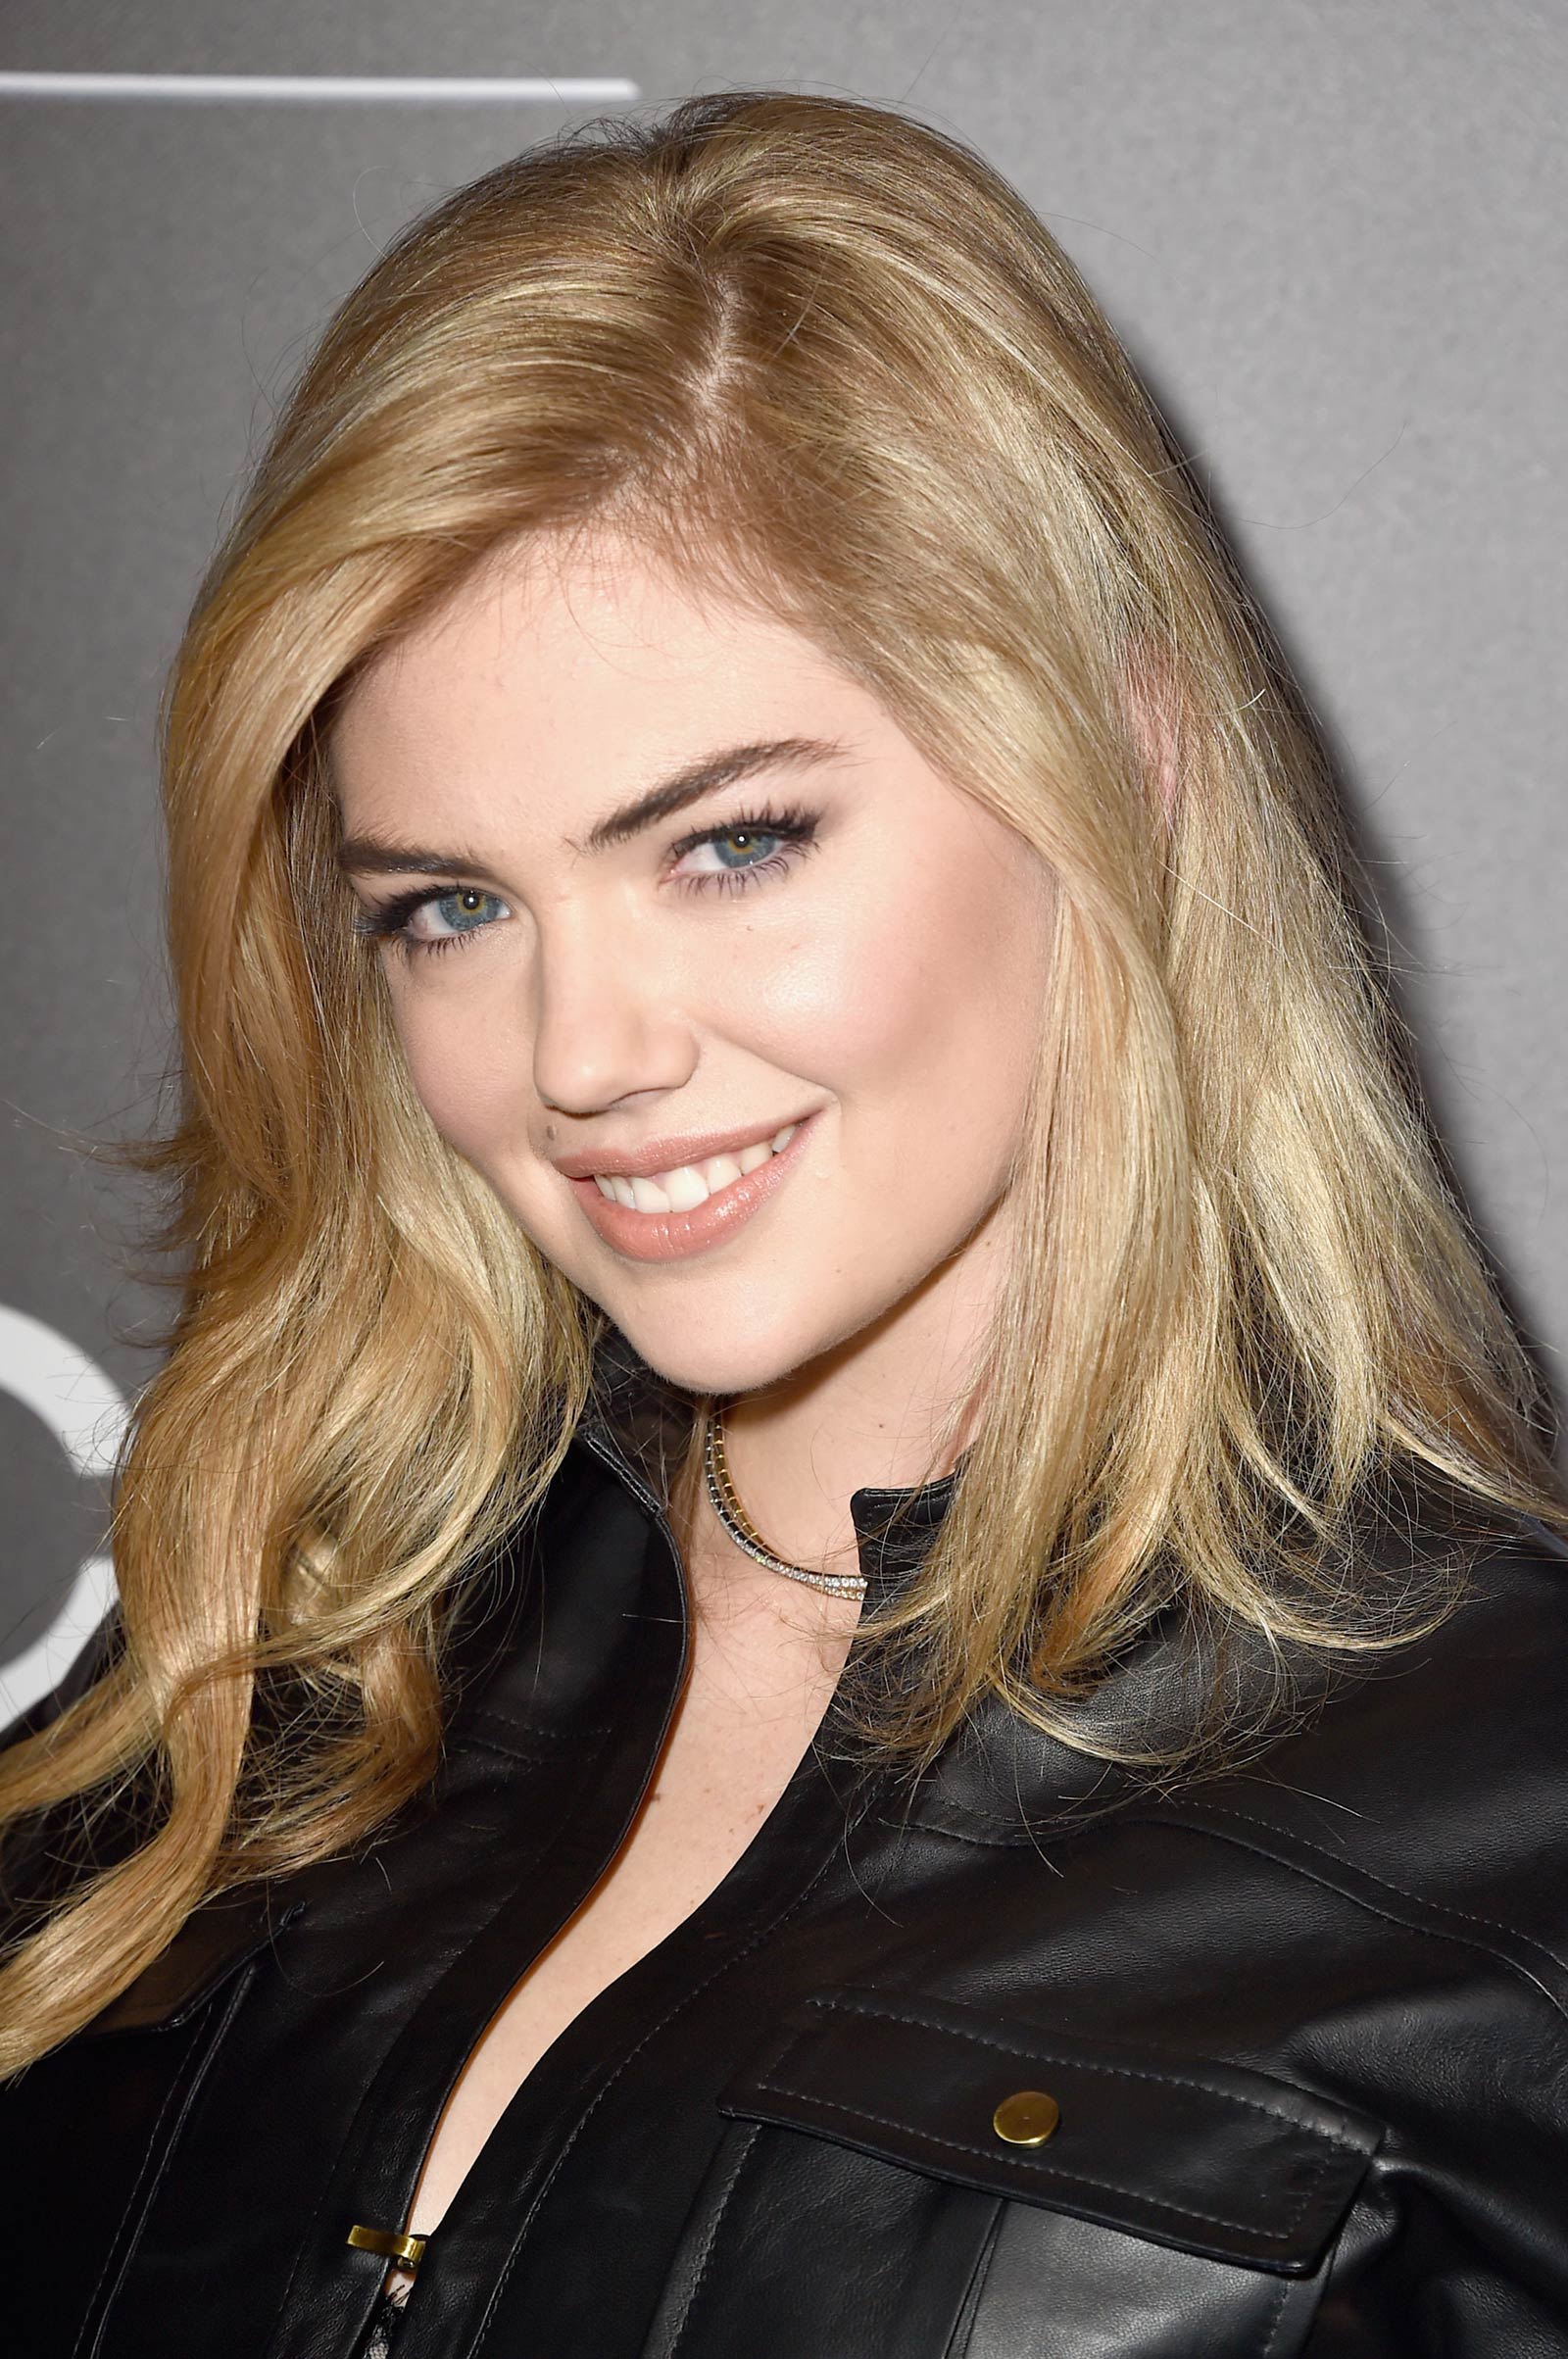 Kate Upton attends The PEOPLE Magazine Awards